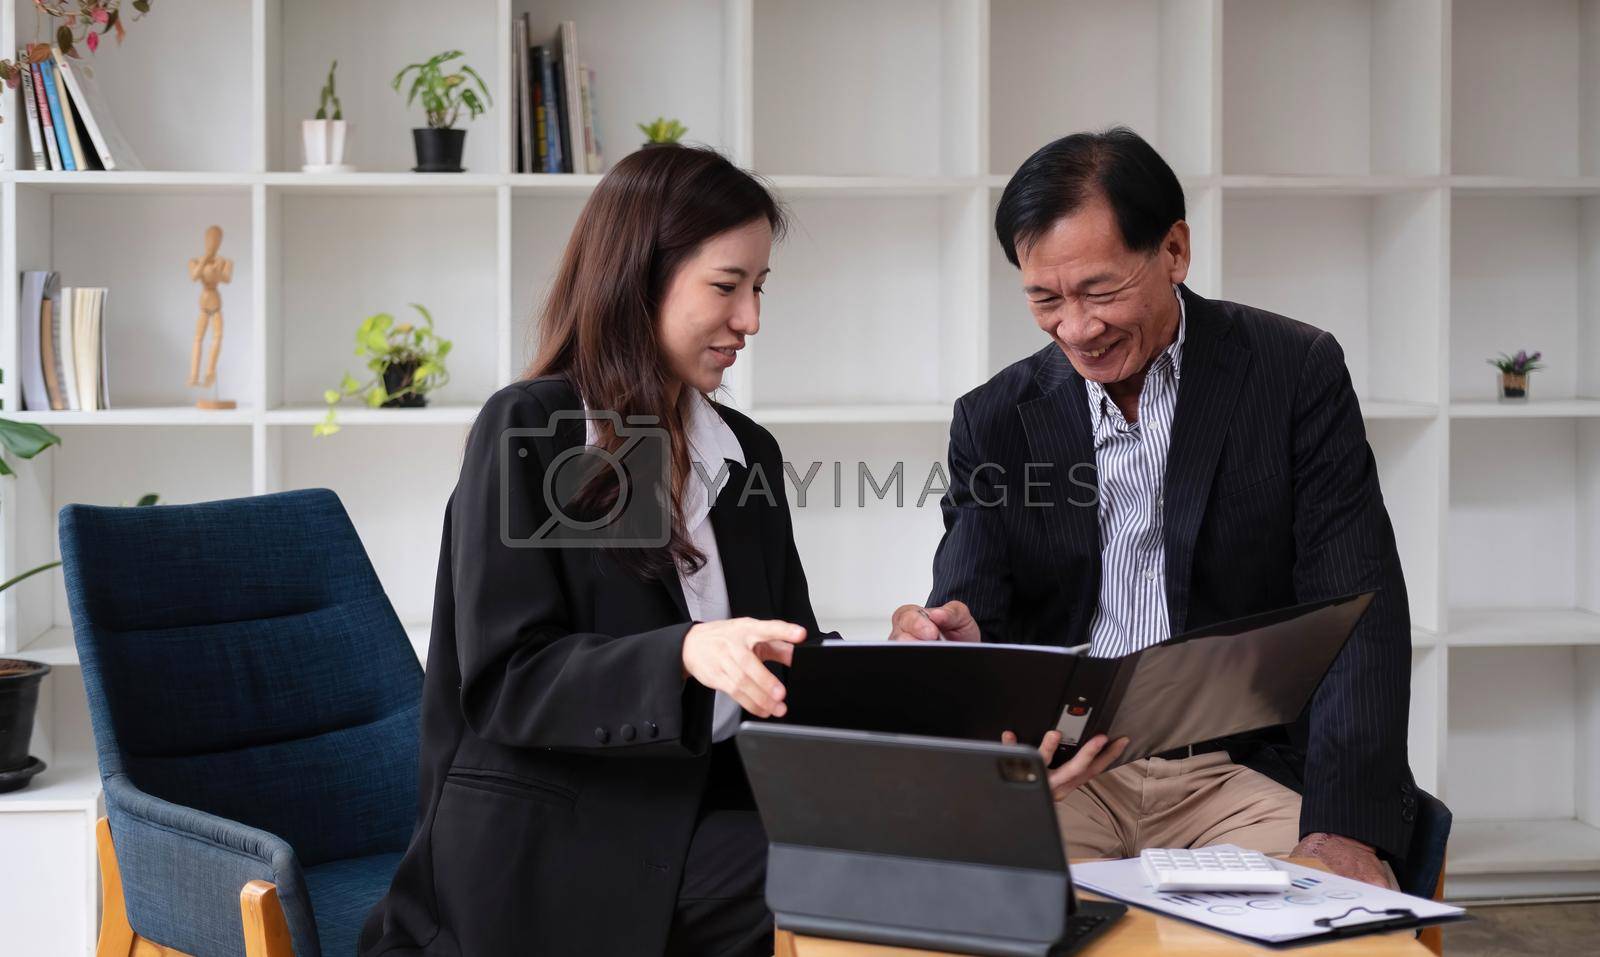 Royalty free image of Happy woman and middle-aged man sit at office desk work on laptop together laughing on funny joke, smiling diverse colleagues have fun talking cooperating at workplace by wichayada